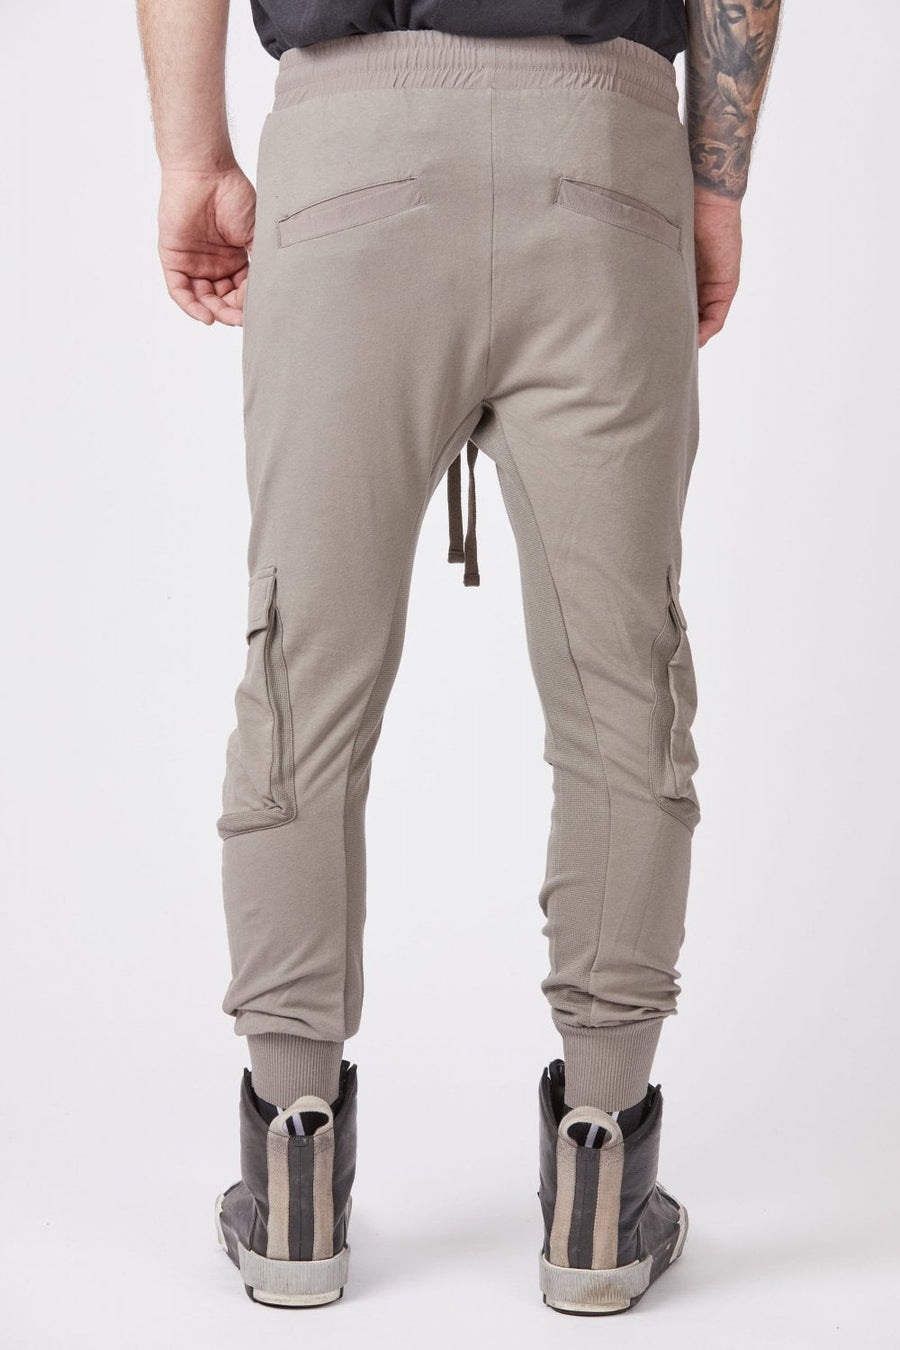 Buy the Thom Krom M ST 322 Sweatpants in Ash at Intro. Spend £50 for free UK delivery. Official stockists. We ship worldwide.